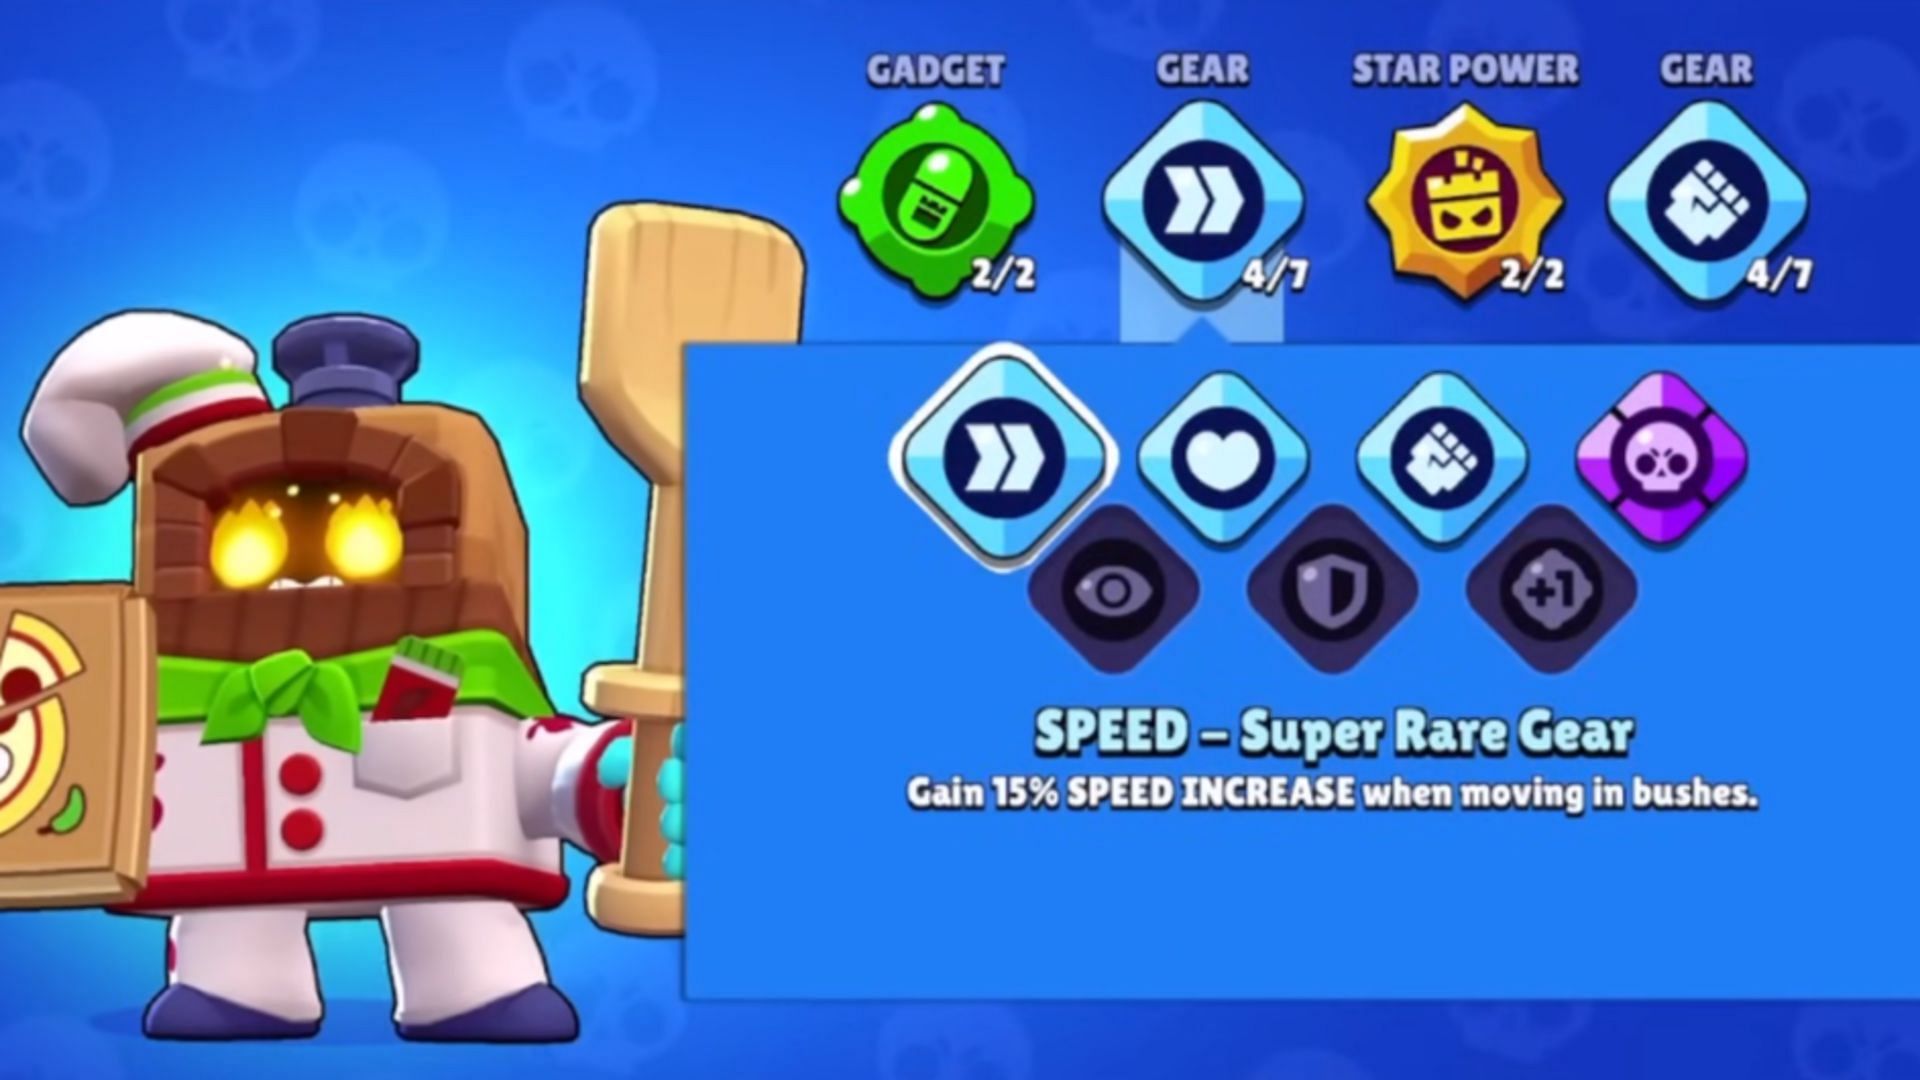 Speed Gear (Image via Supercell)